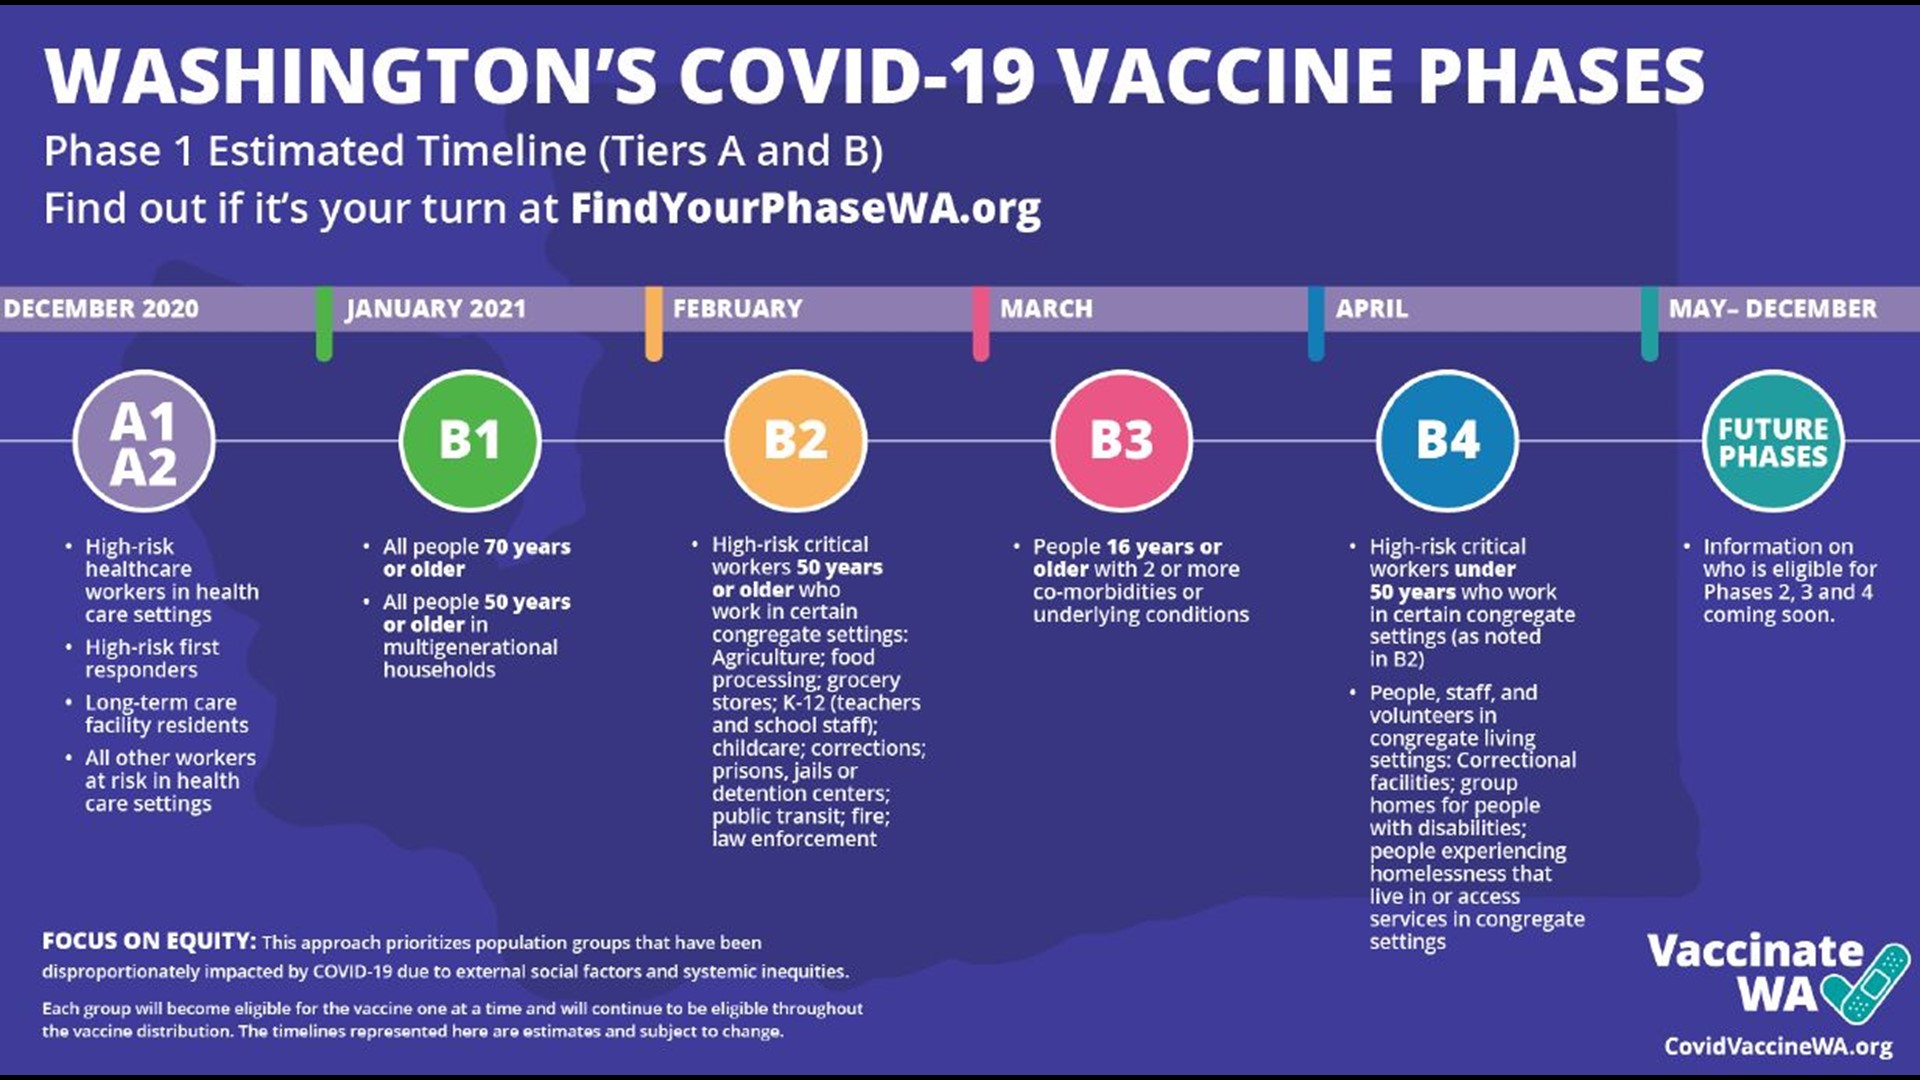 Washington health officials say the next phase of the vaccination rollout will include four tiers, including a tier for some people under the age of 50.